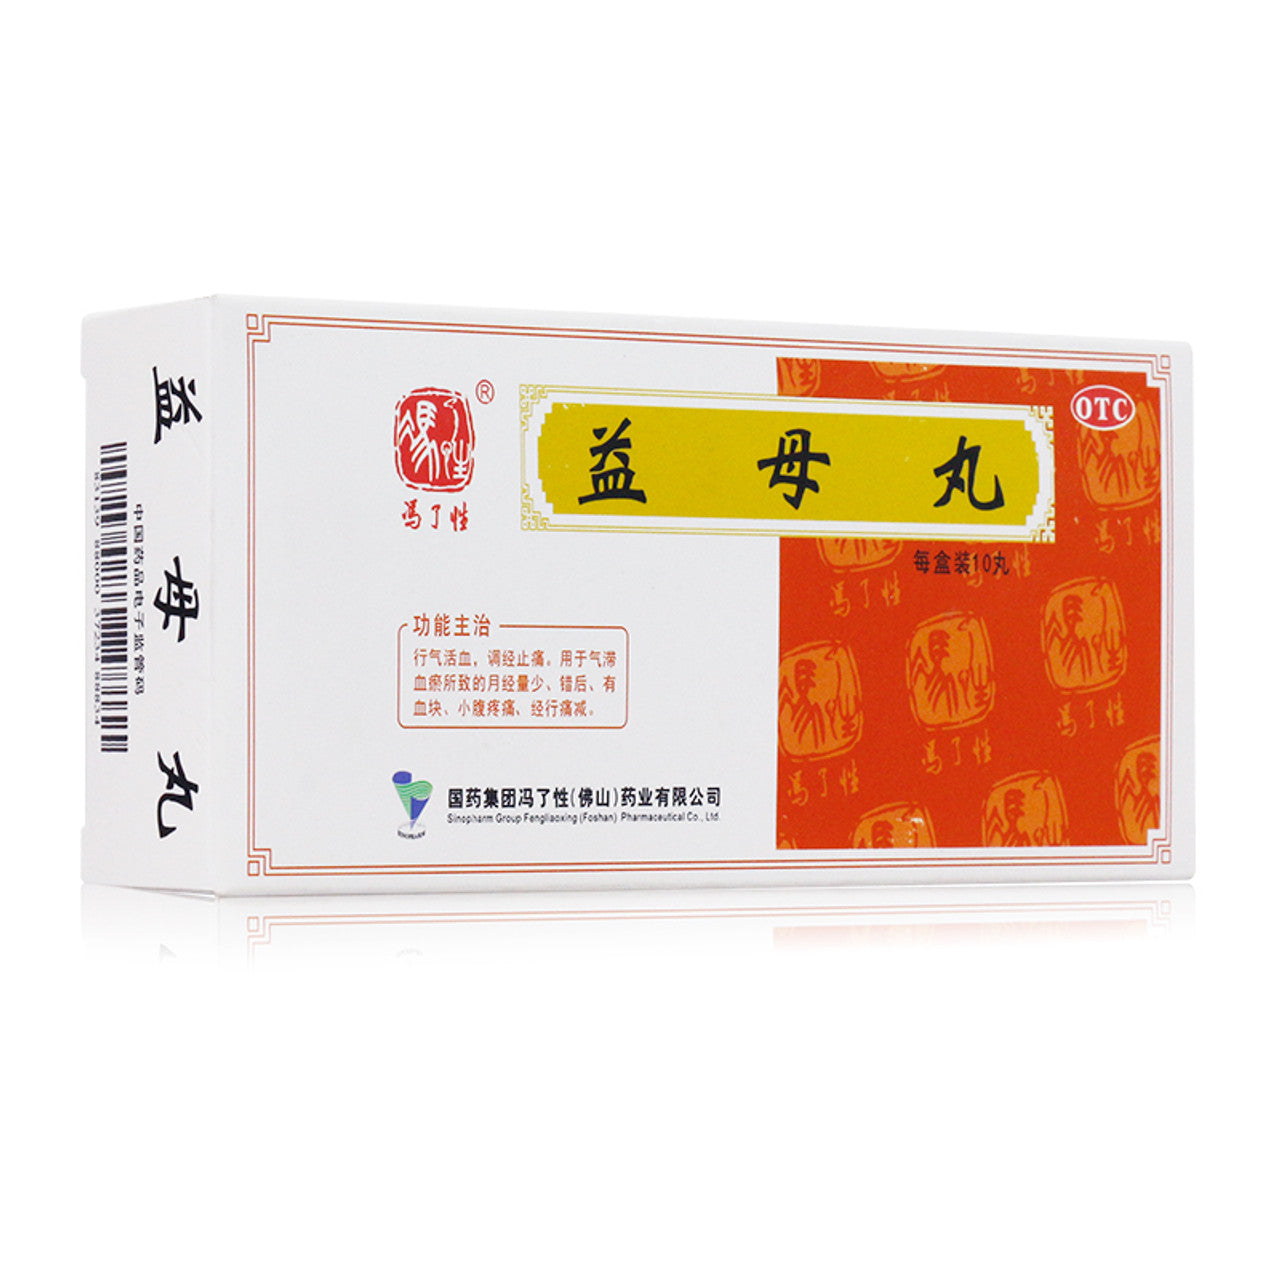 China Herb. Brand Fengliaoxing. Yimu Wan or Yi Mu Wan or YIMUWAN or Yimu Pills or Yi Mu Pills for he low menstrual volume, after the wrong period, blood clots, lower abdomen pain and menstrual pain caused by qi stagnation and blood stasis.